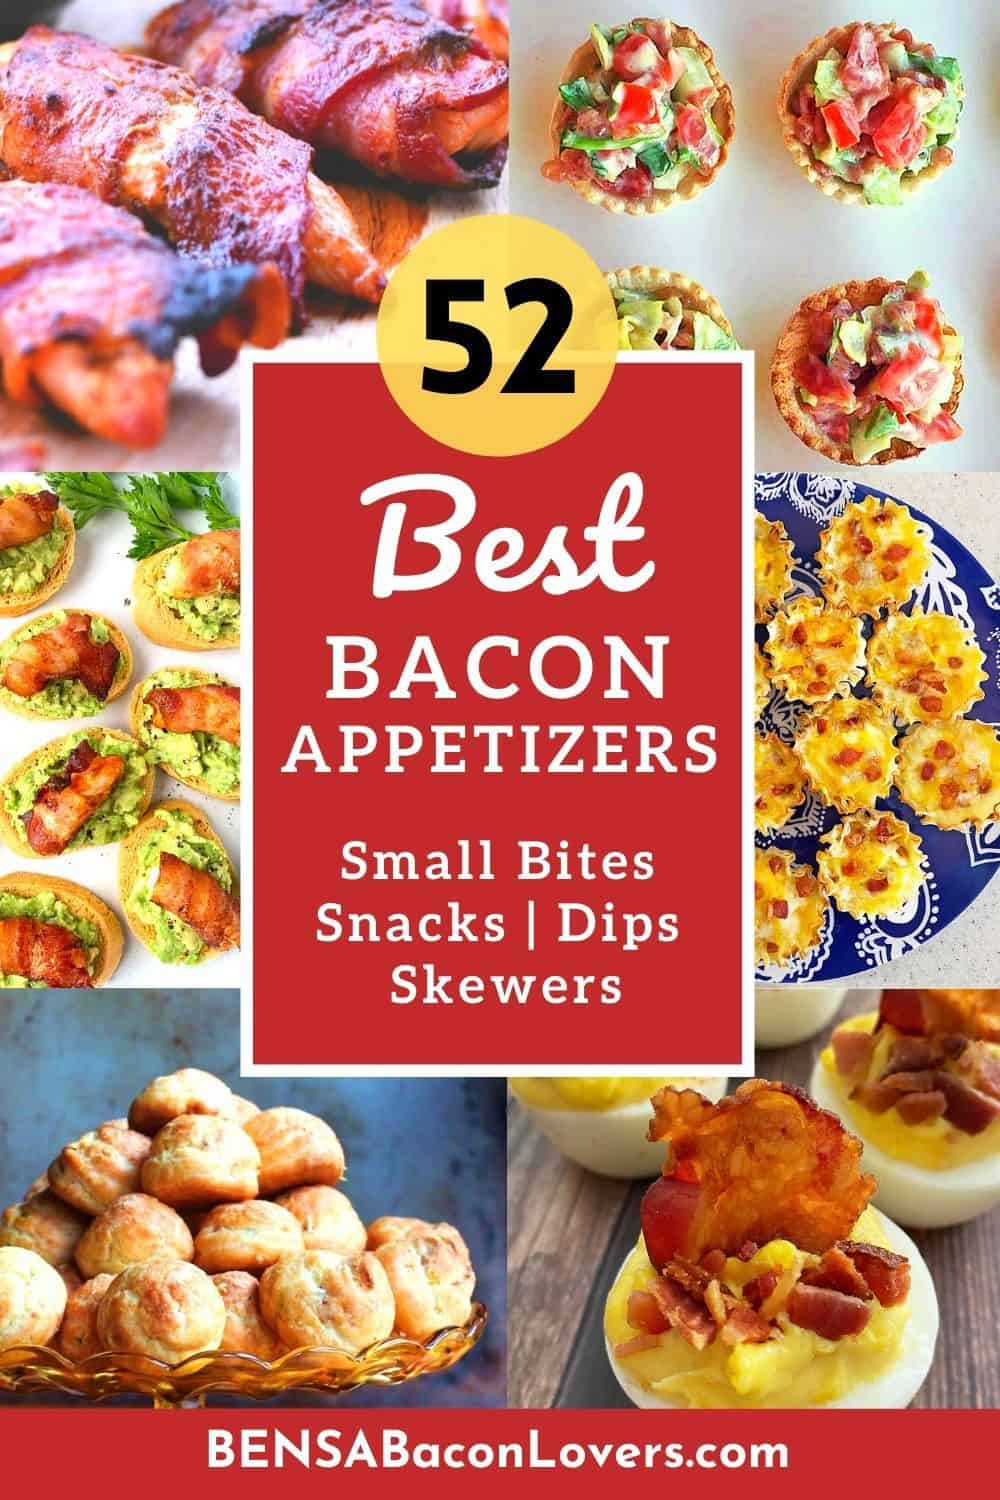 A vertical collage with 6 bacon appetizers shown plus the text "52 Best Bacon Appetizers - Small Bites, Snacks, Dips, Skewers" for Pinterest